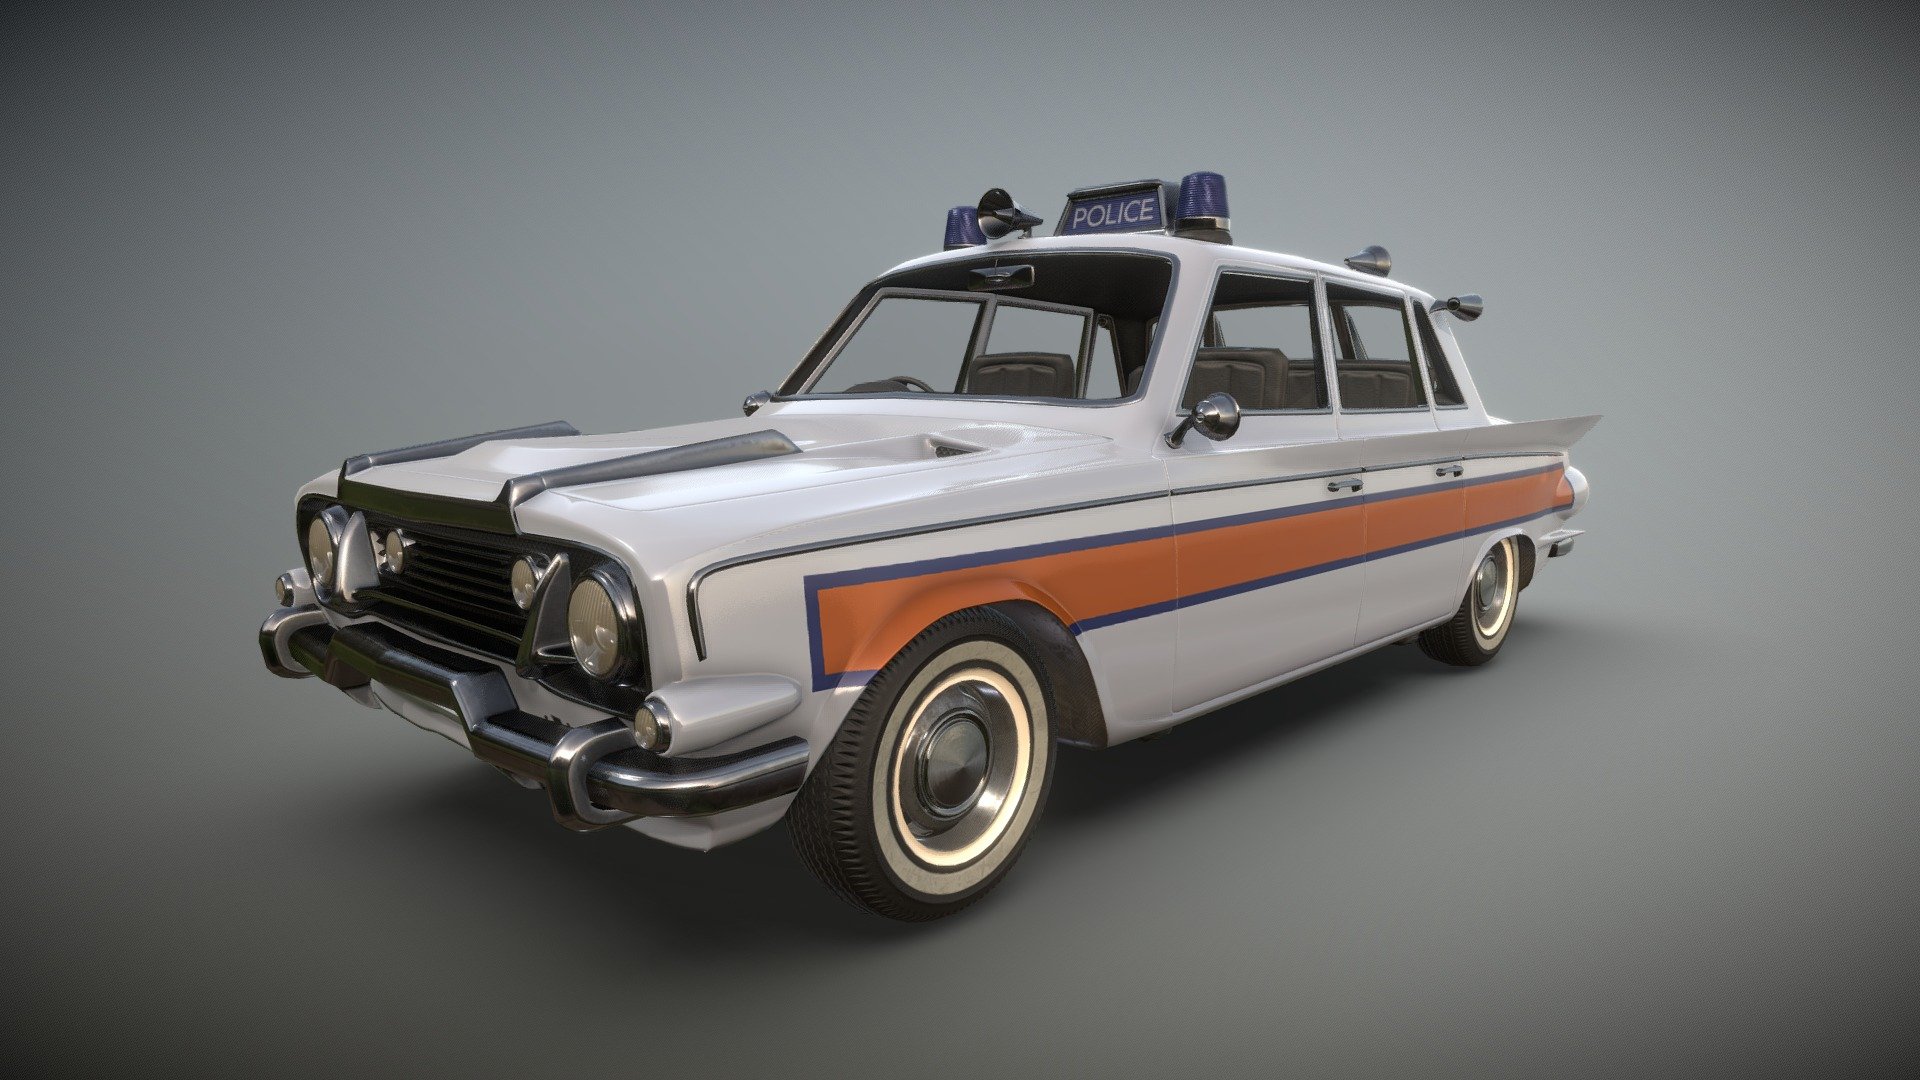 The P90 is of Atom-Punk inspiration recreating a typically british classic styled saloon car - This version in its Police trim.

This model has been created using a high-low poly construction method &amp; comes with a PBR Metallic / Roughness texture set. 

(The Engine in this model is for showcase purposes only and not intendid for game usage as it is 32k tri's on its own)

Originally created for modding purposes.

All Doors open &amp; are Fully modelled including hood &amp; tailgate.

Different livery can be supplied on request for an additional fee.

See more of my artwork on my ArtStation:

https://www.artstation.com/edgeuk90

Notice: Incorrect download / ripping of this content will result in a DMCA being filed against you 3d model